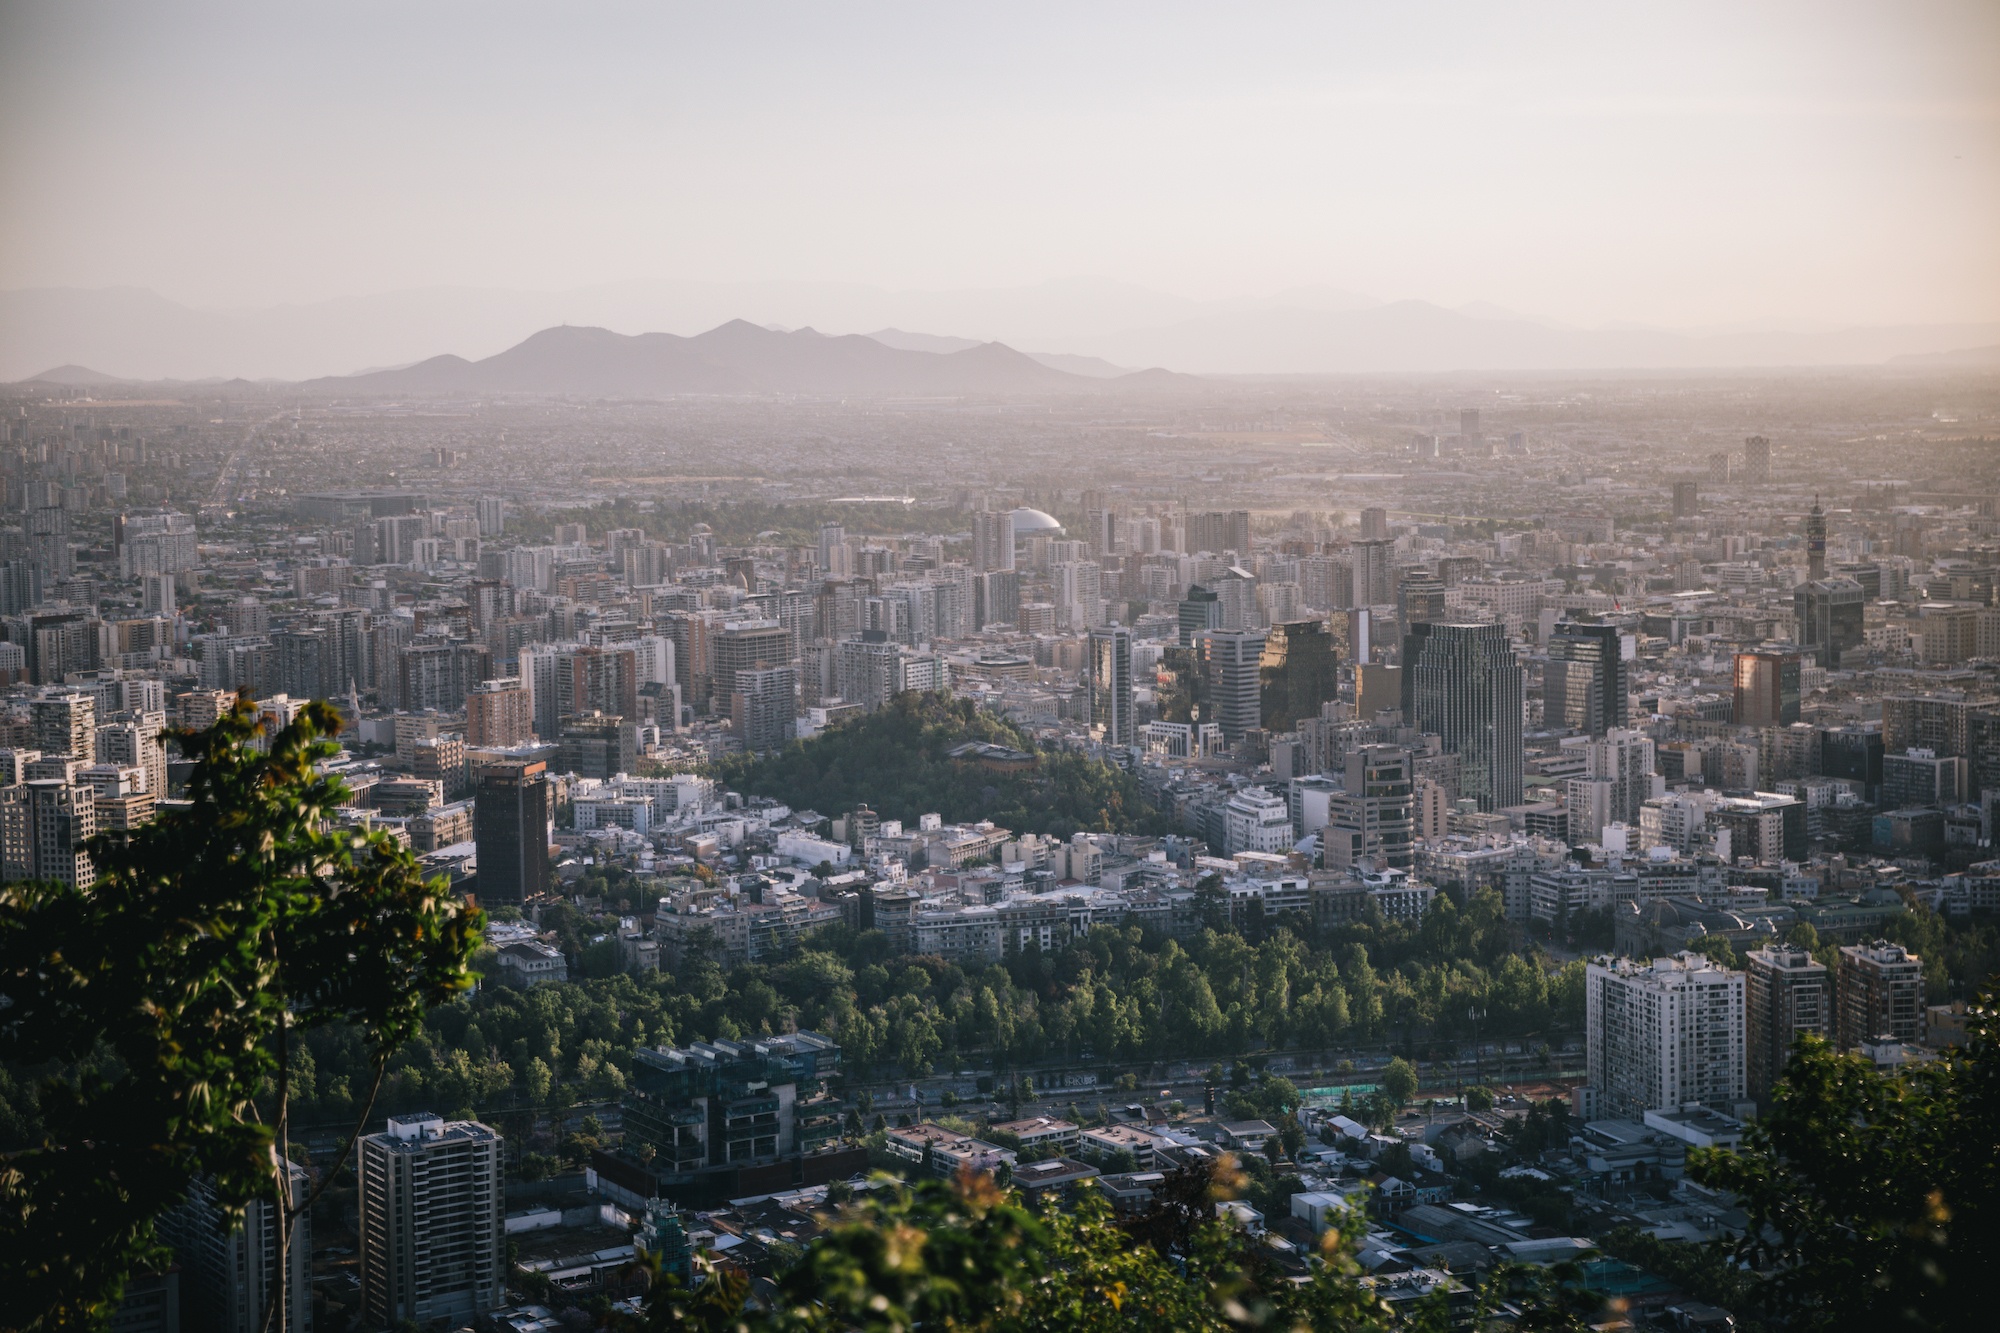 48 hours in Santiago, Chile